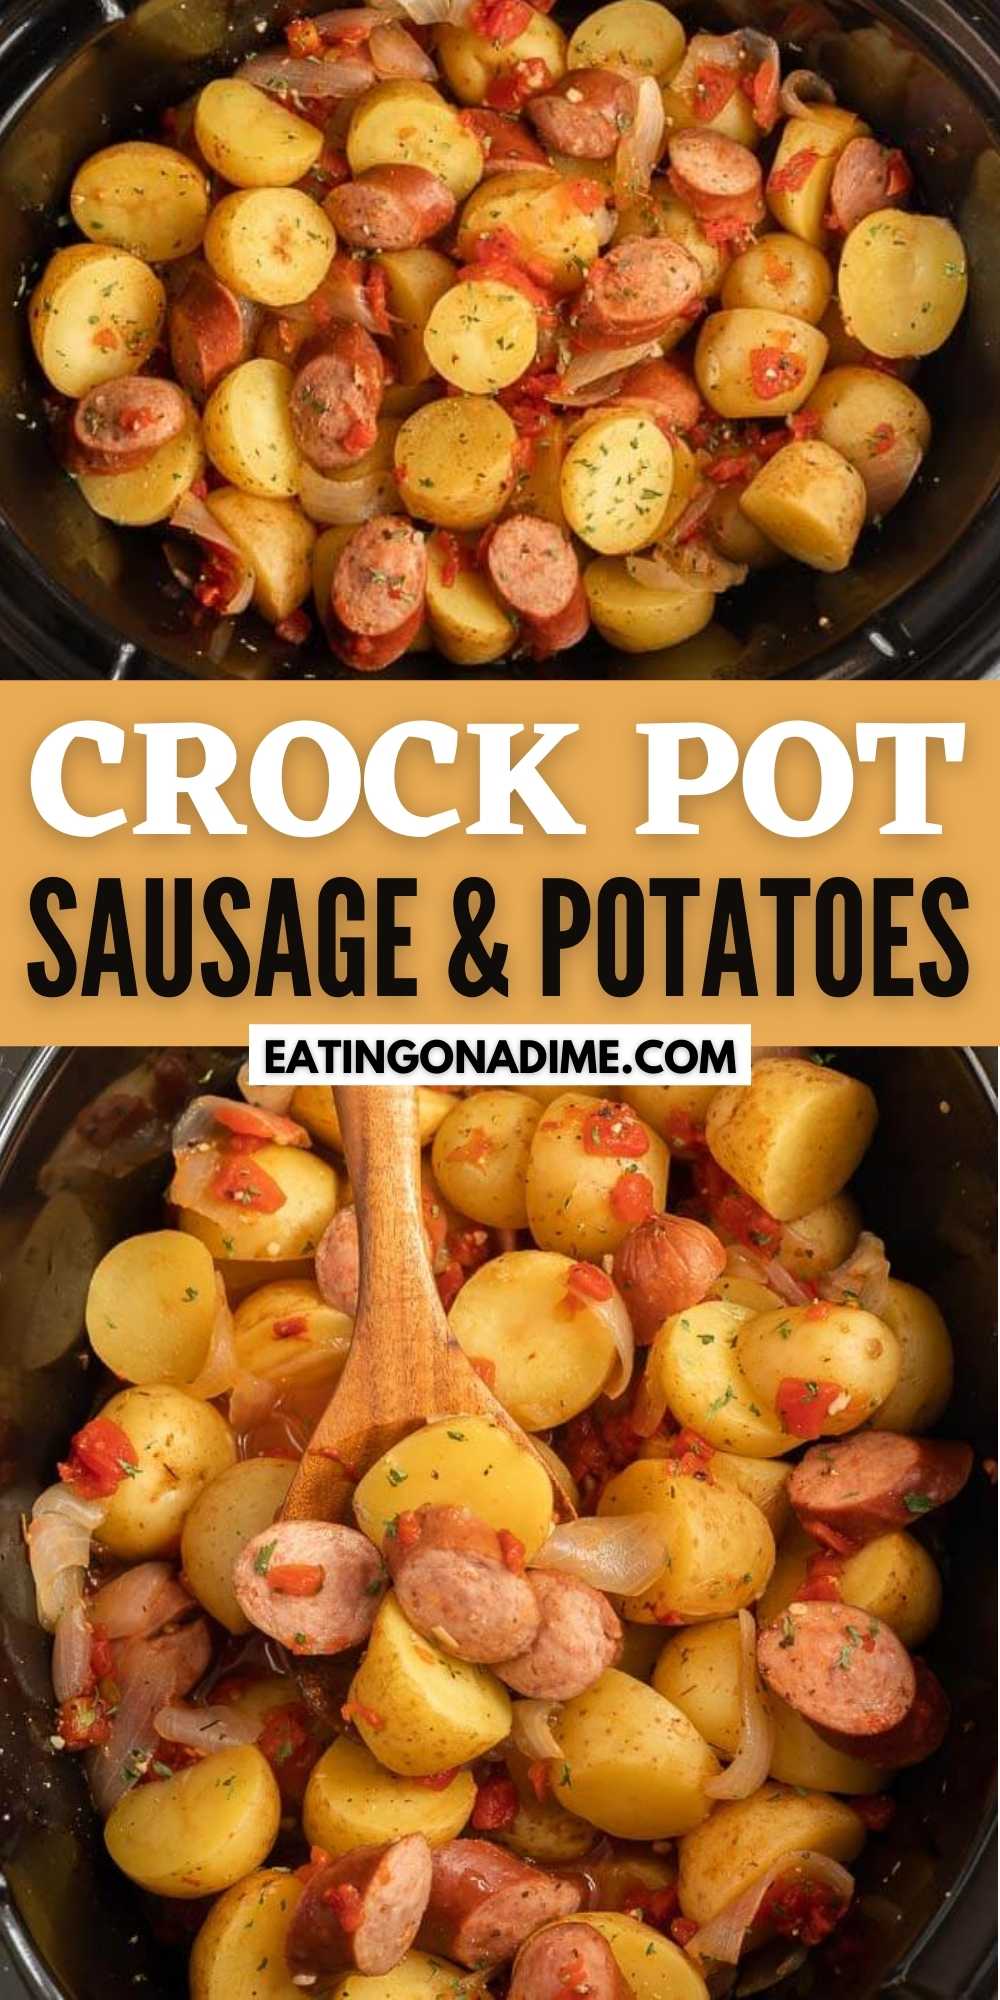 Your family will love this simple Crock Pot Sausage and Potatoes recipe. Toss everything into the crockpot for a tasty dinner everyone will enjoy. You will love this slow cooker recipe.  It’s one of my favorite easy recipes.  #eatingonadime #crockpotrecipes #slowcookerrecipes #sausagerecipes 
